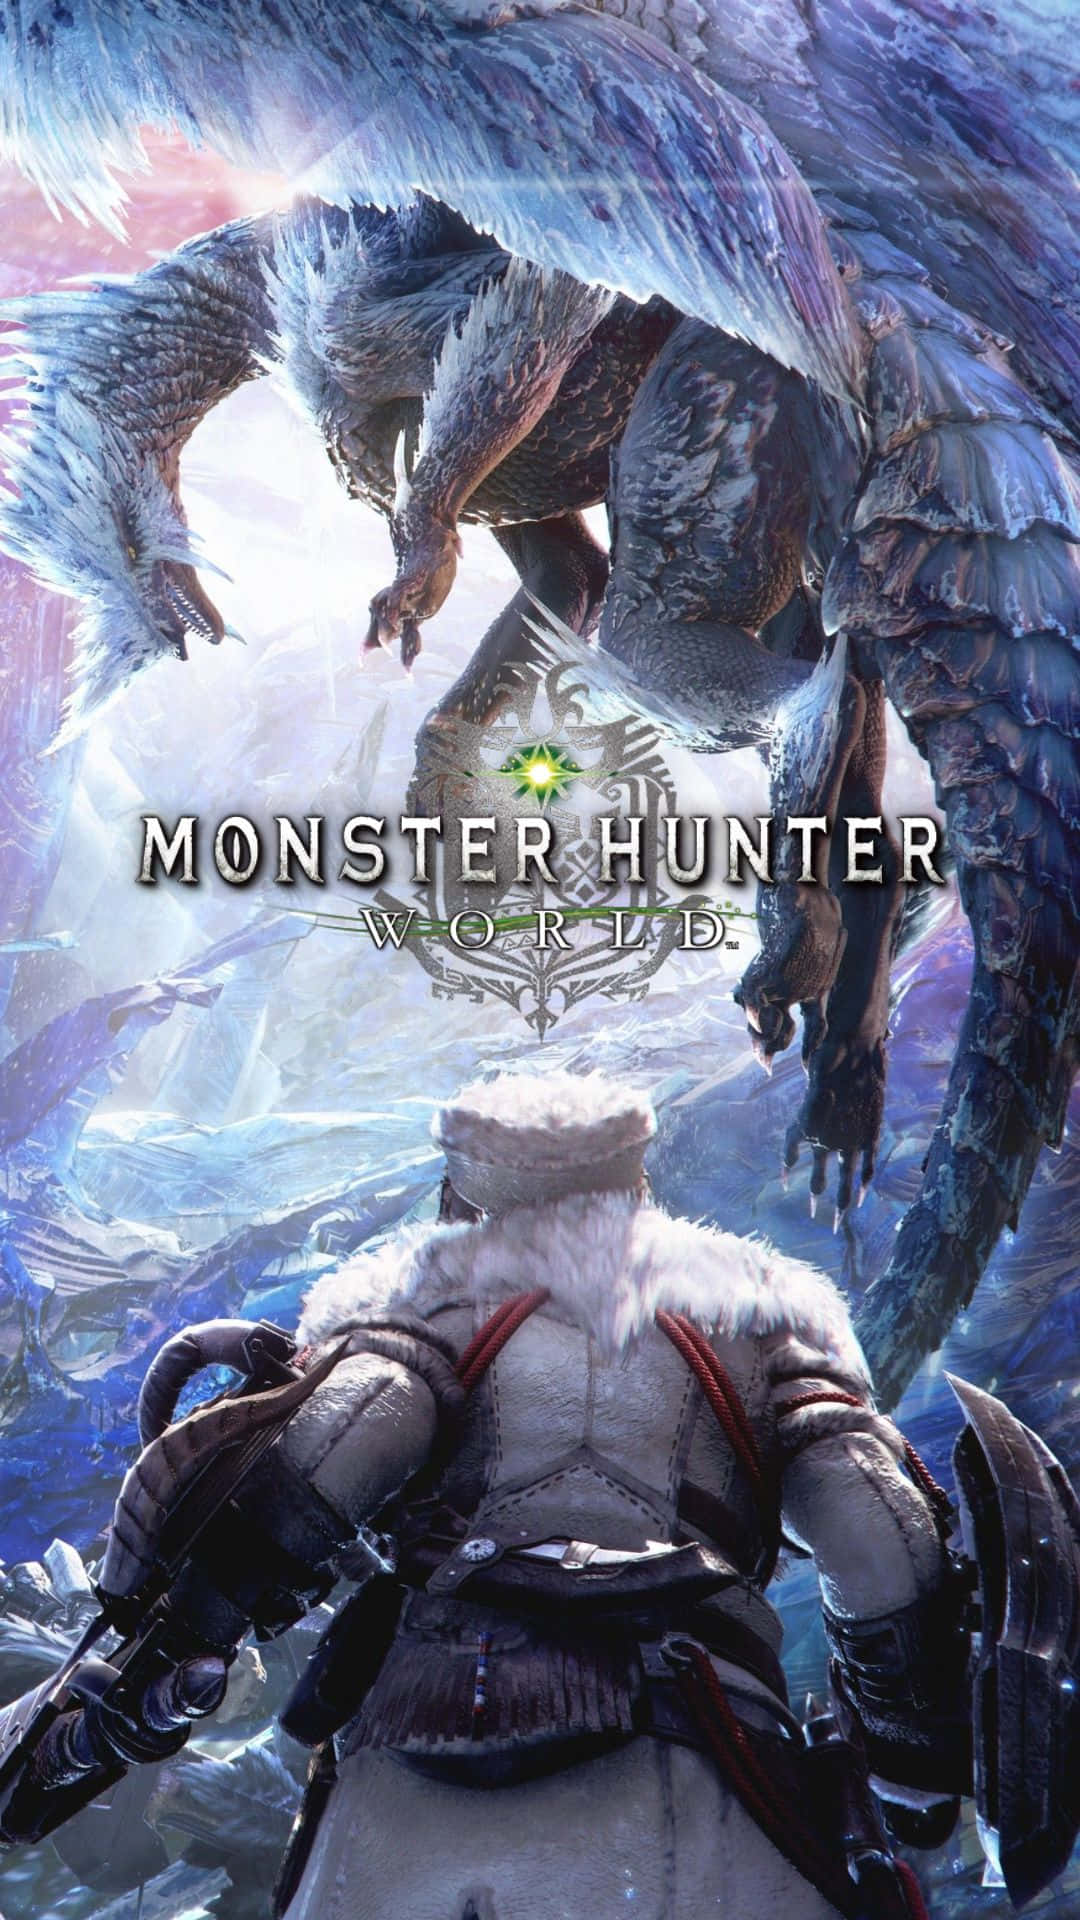 Explore the world of Monster Hunter from your Android device!